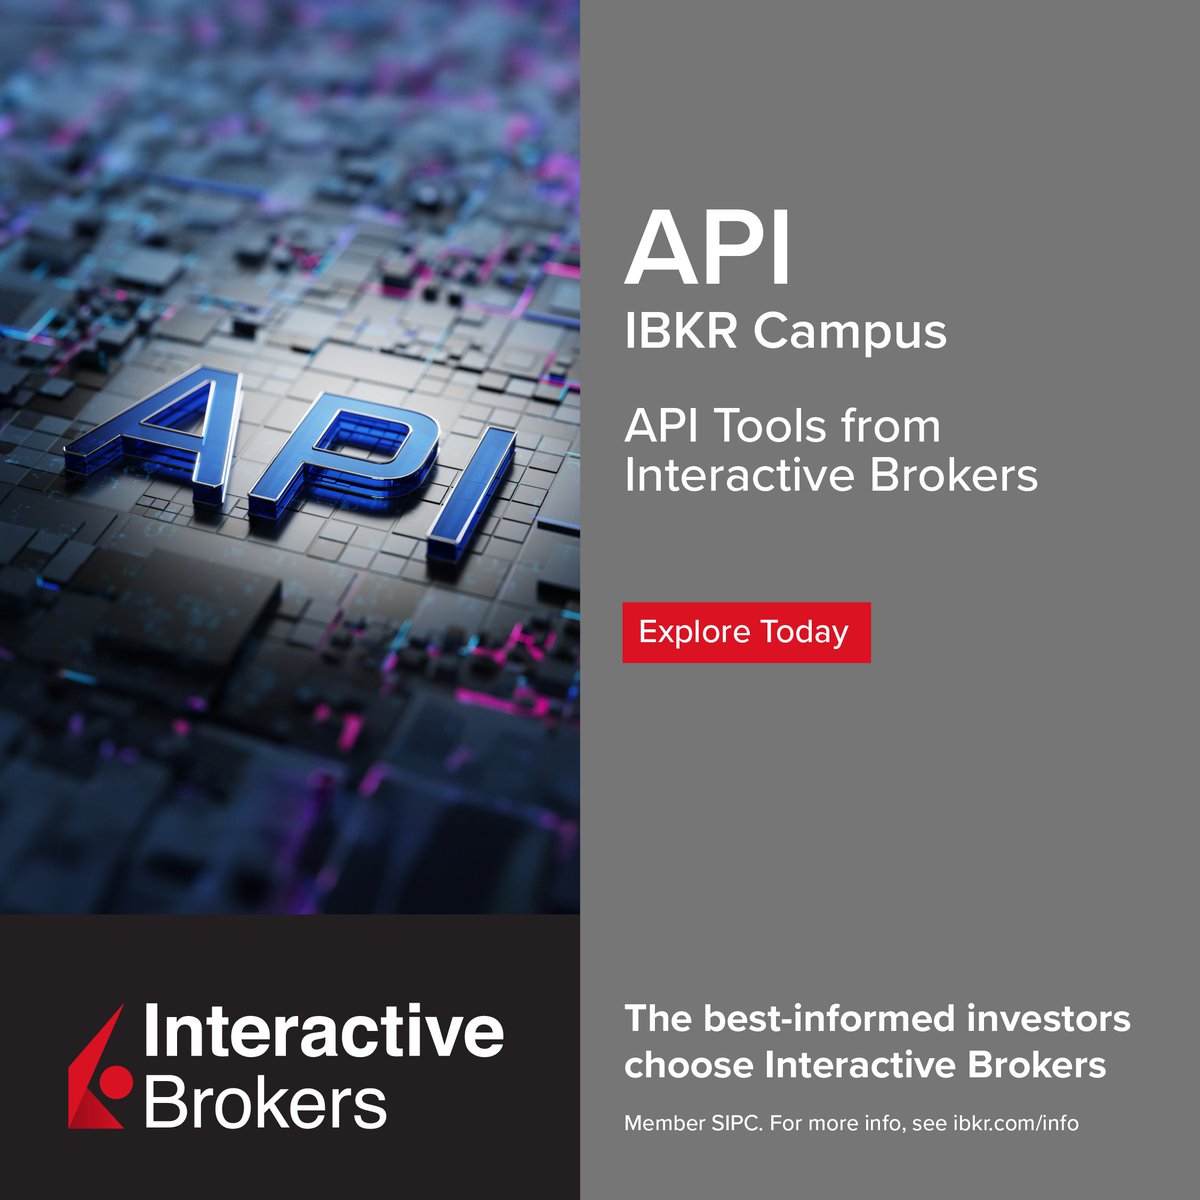 Check out our latest API documentation hub for our clients. We've integrated it with our other financial education offerings on @IBKR_Campus. Find all the API tools from Interactive Brokers here: spr.ly/apict